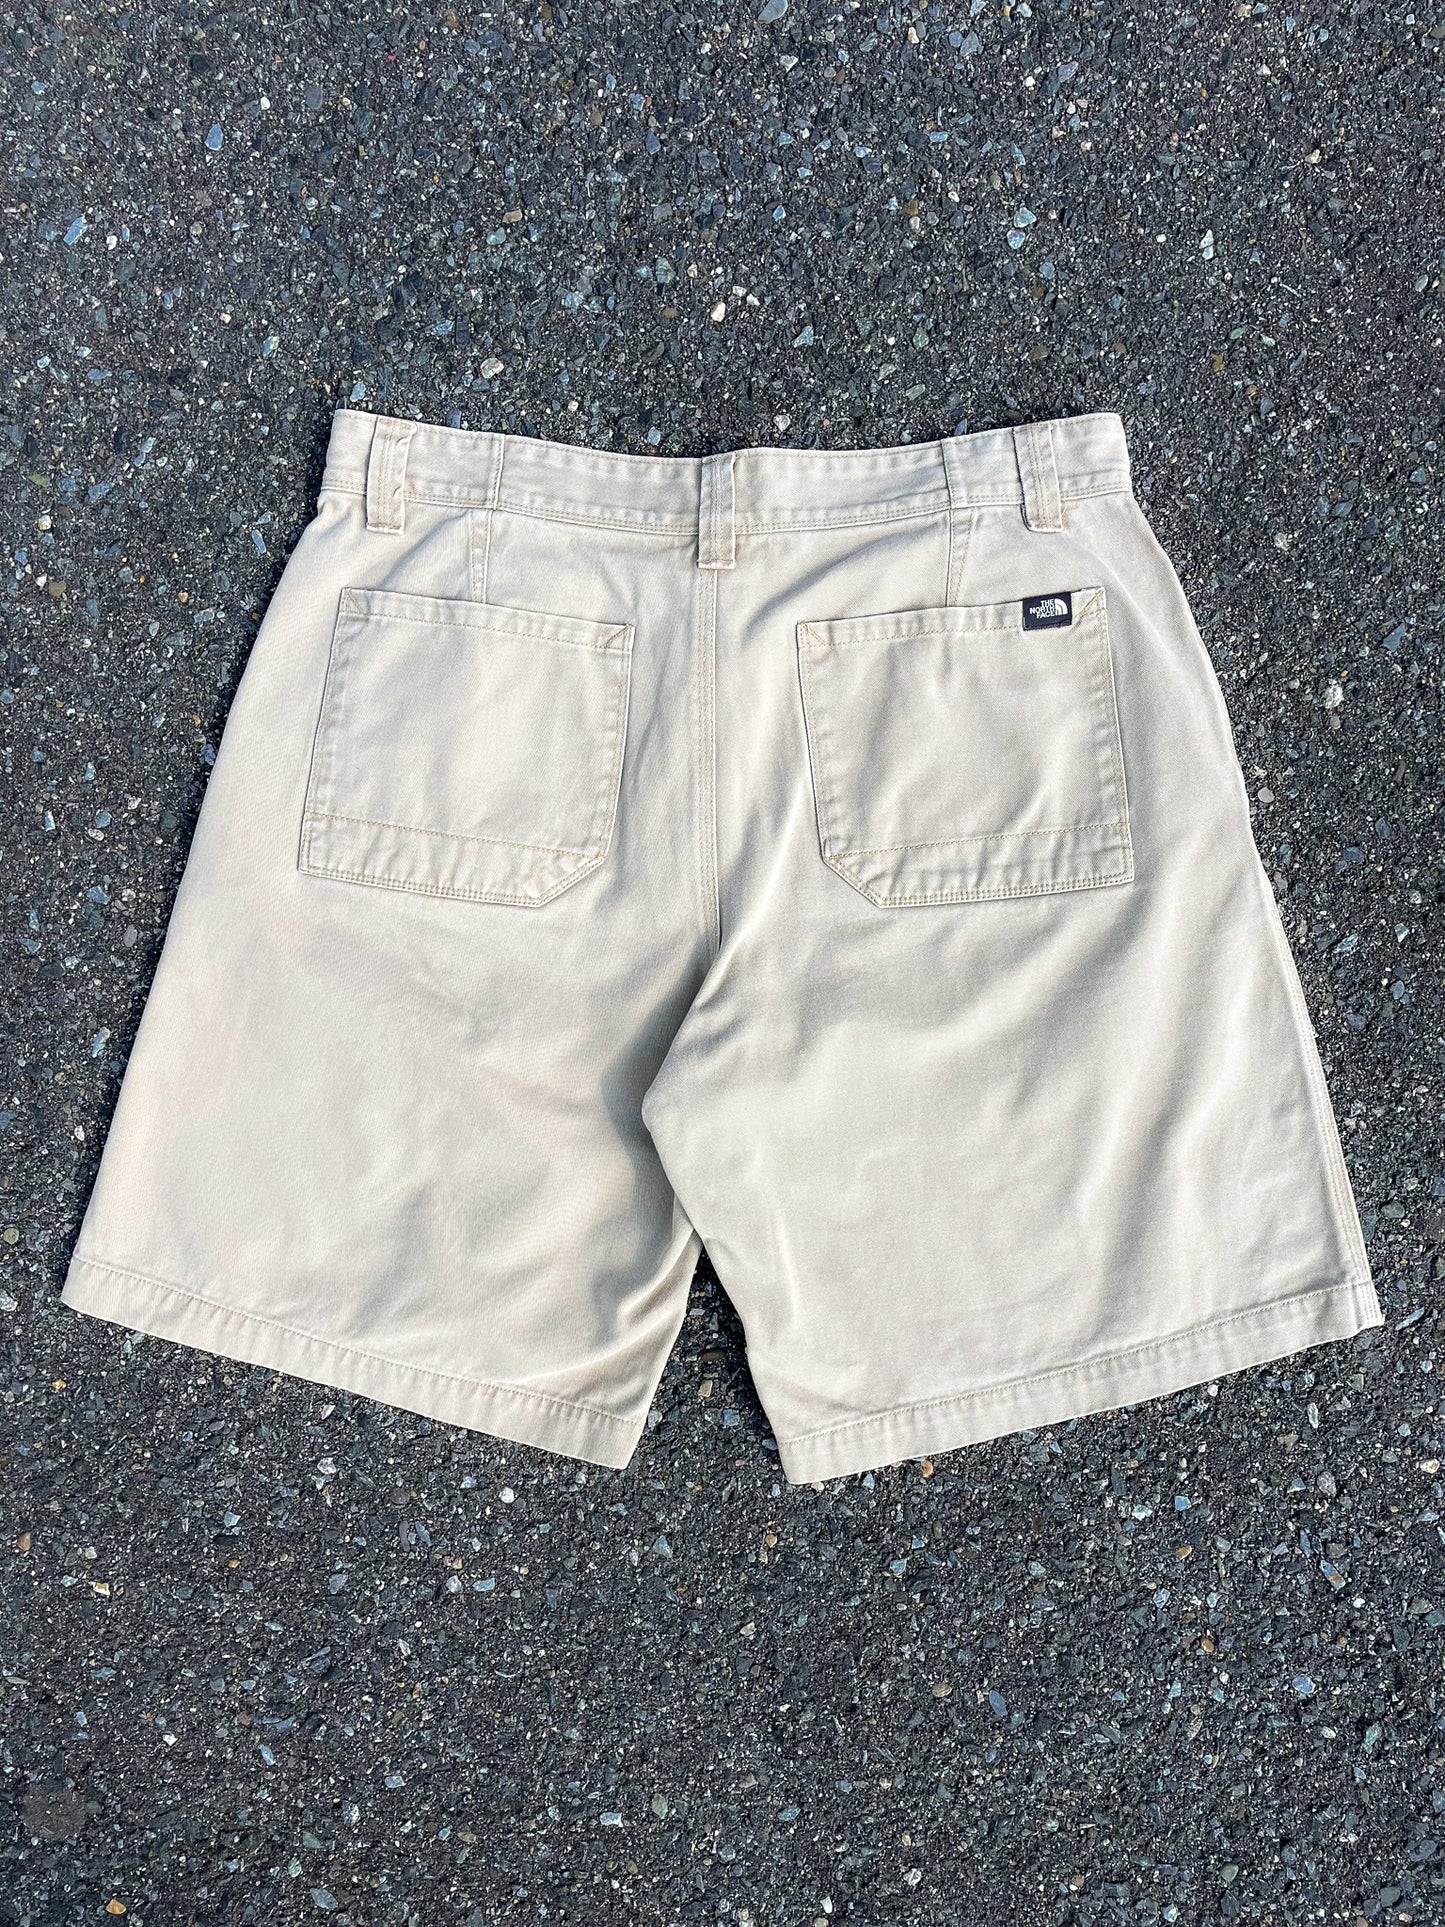 THE NORTH FACE SHORTS—[34]